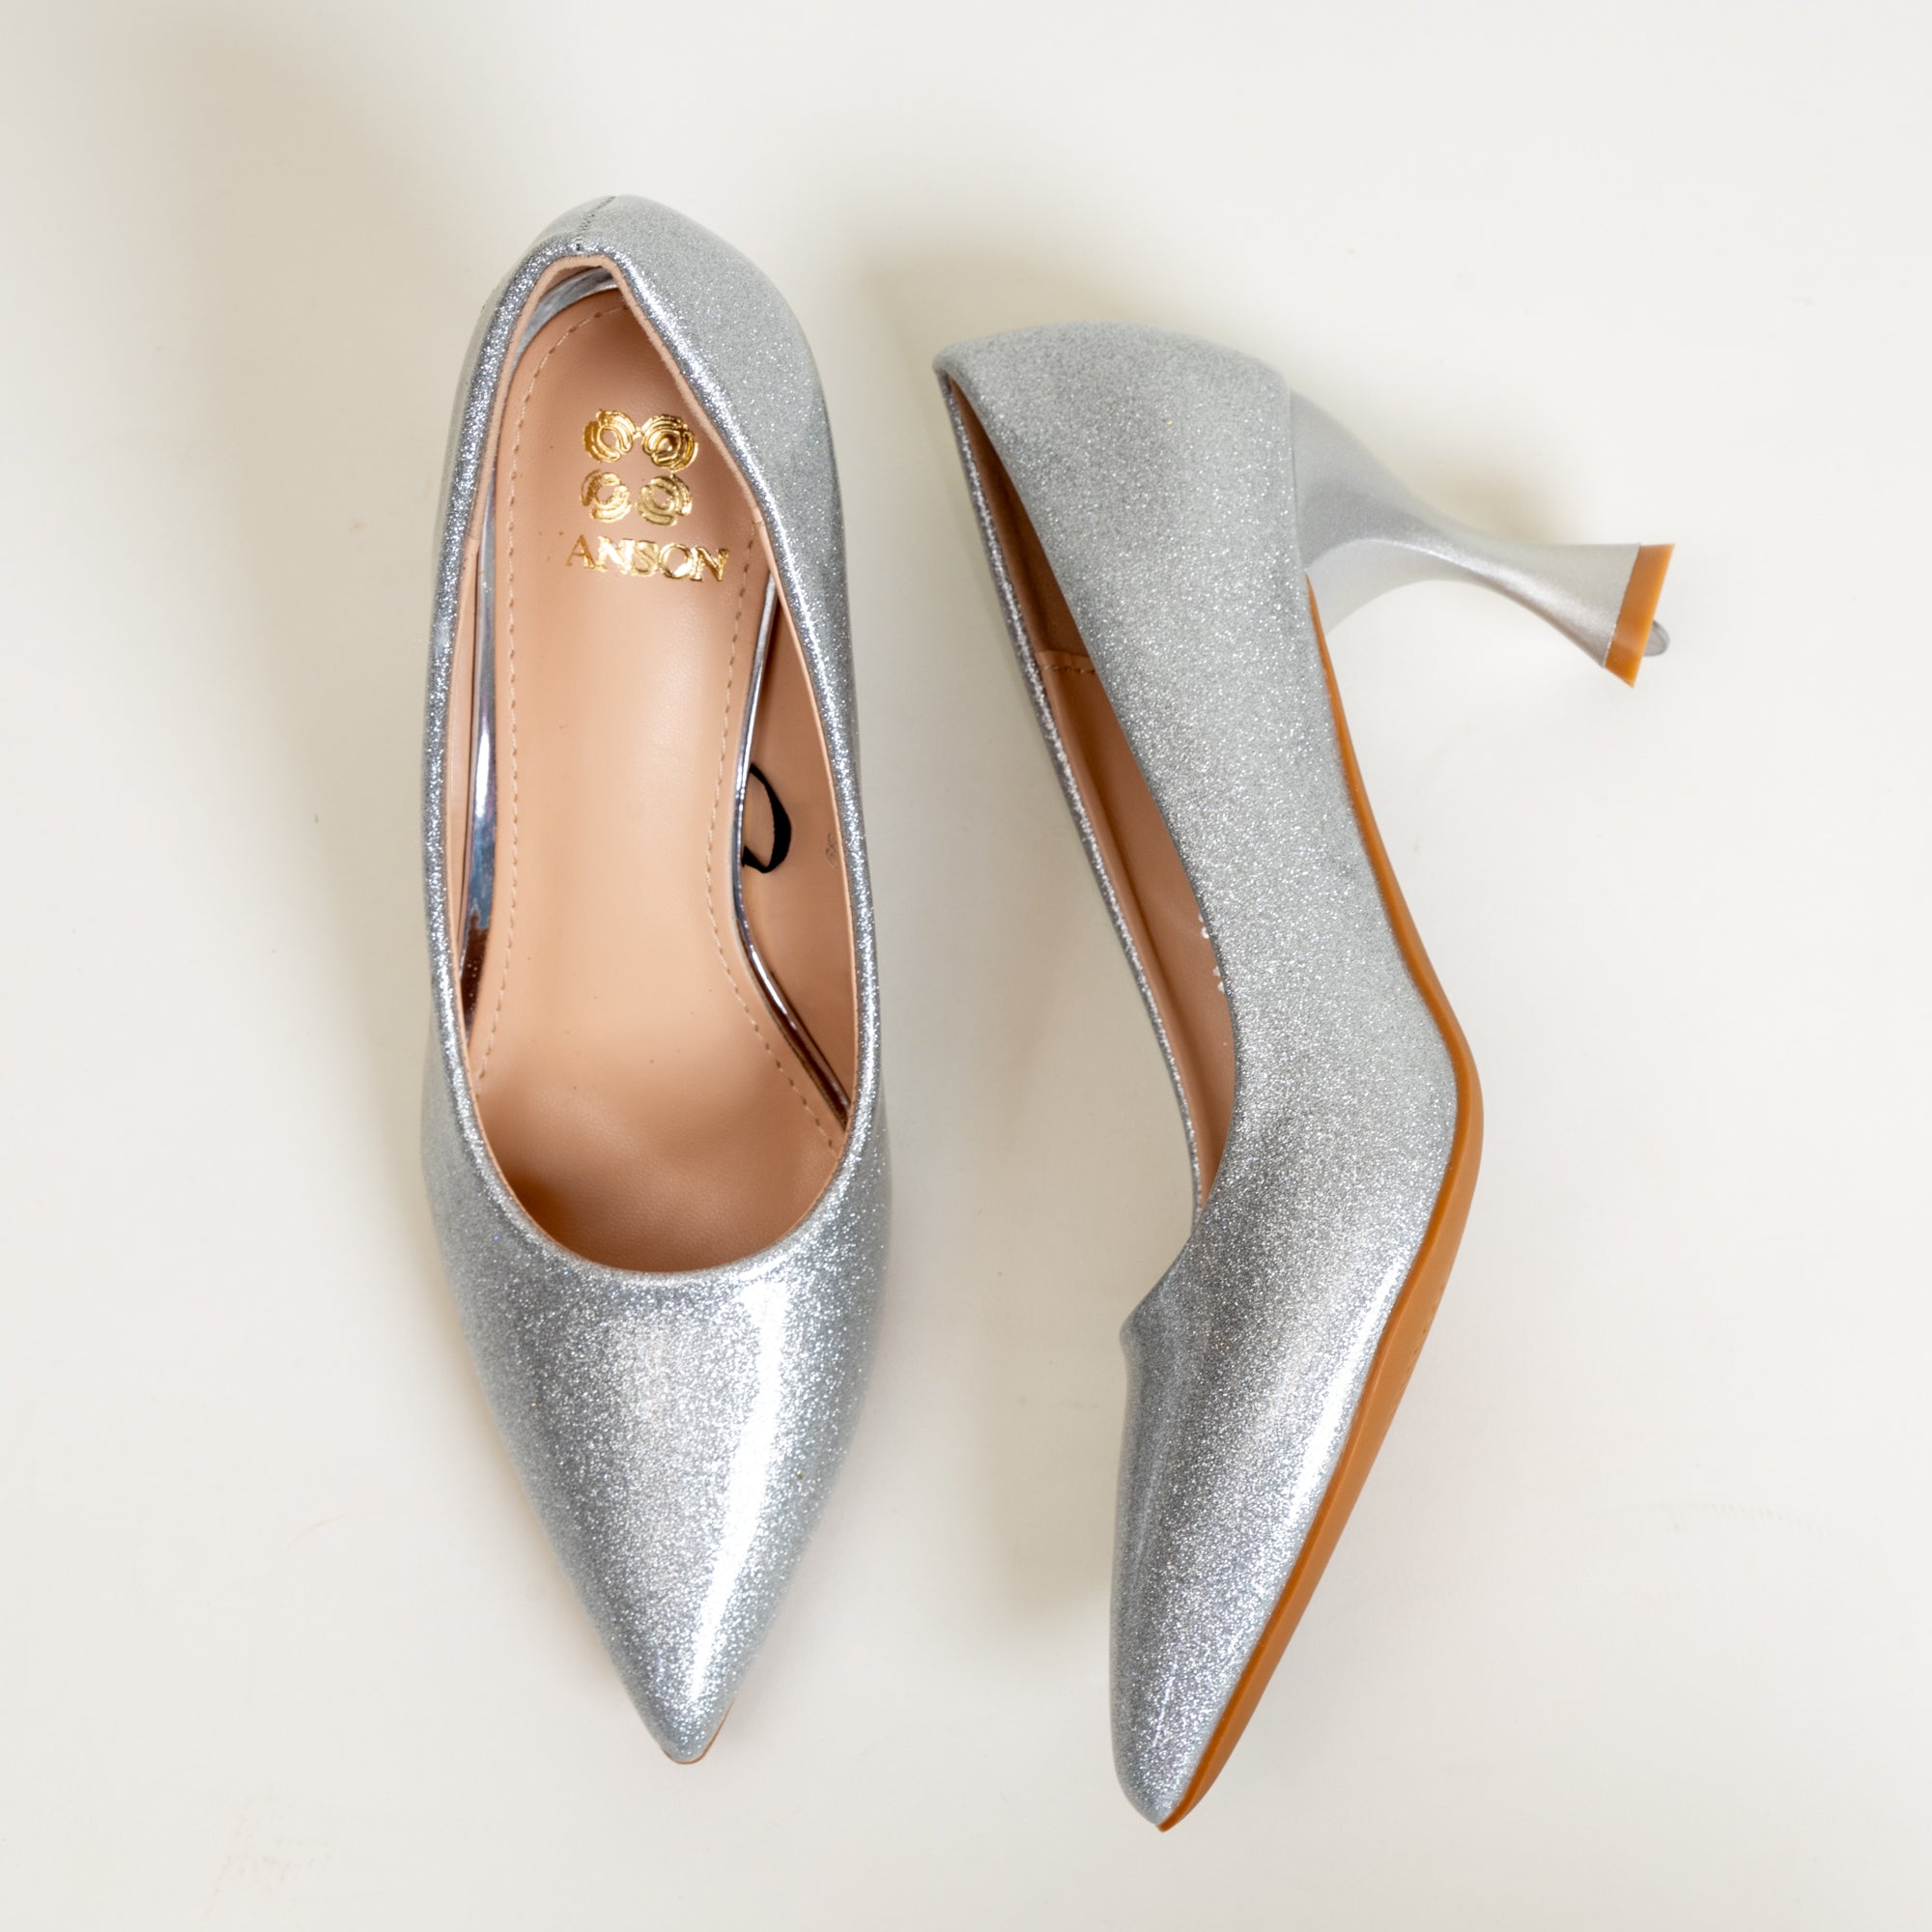 DOROTHY's DREAM-Party wear Pumps in-Silver.